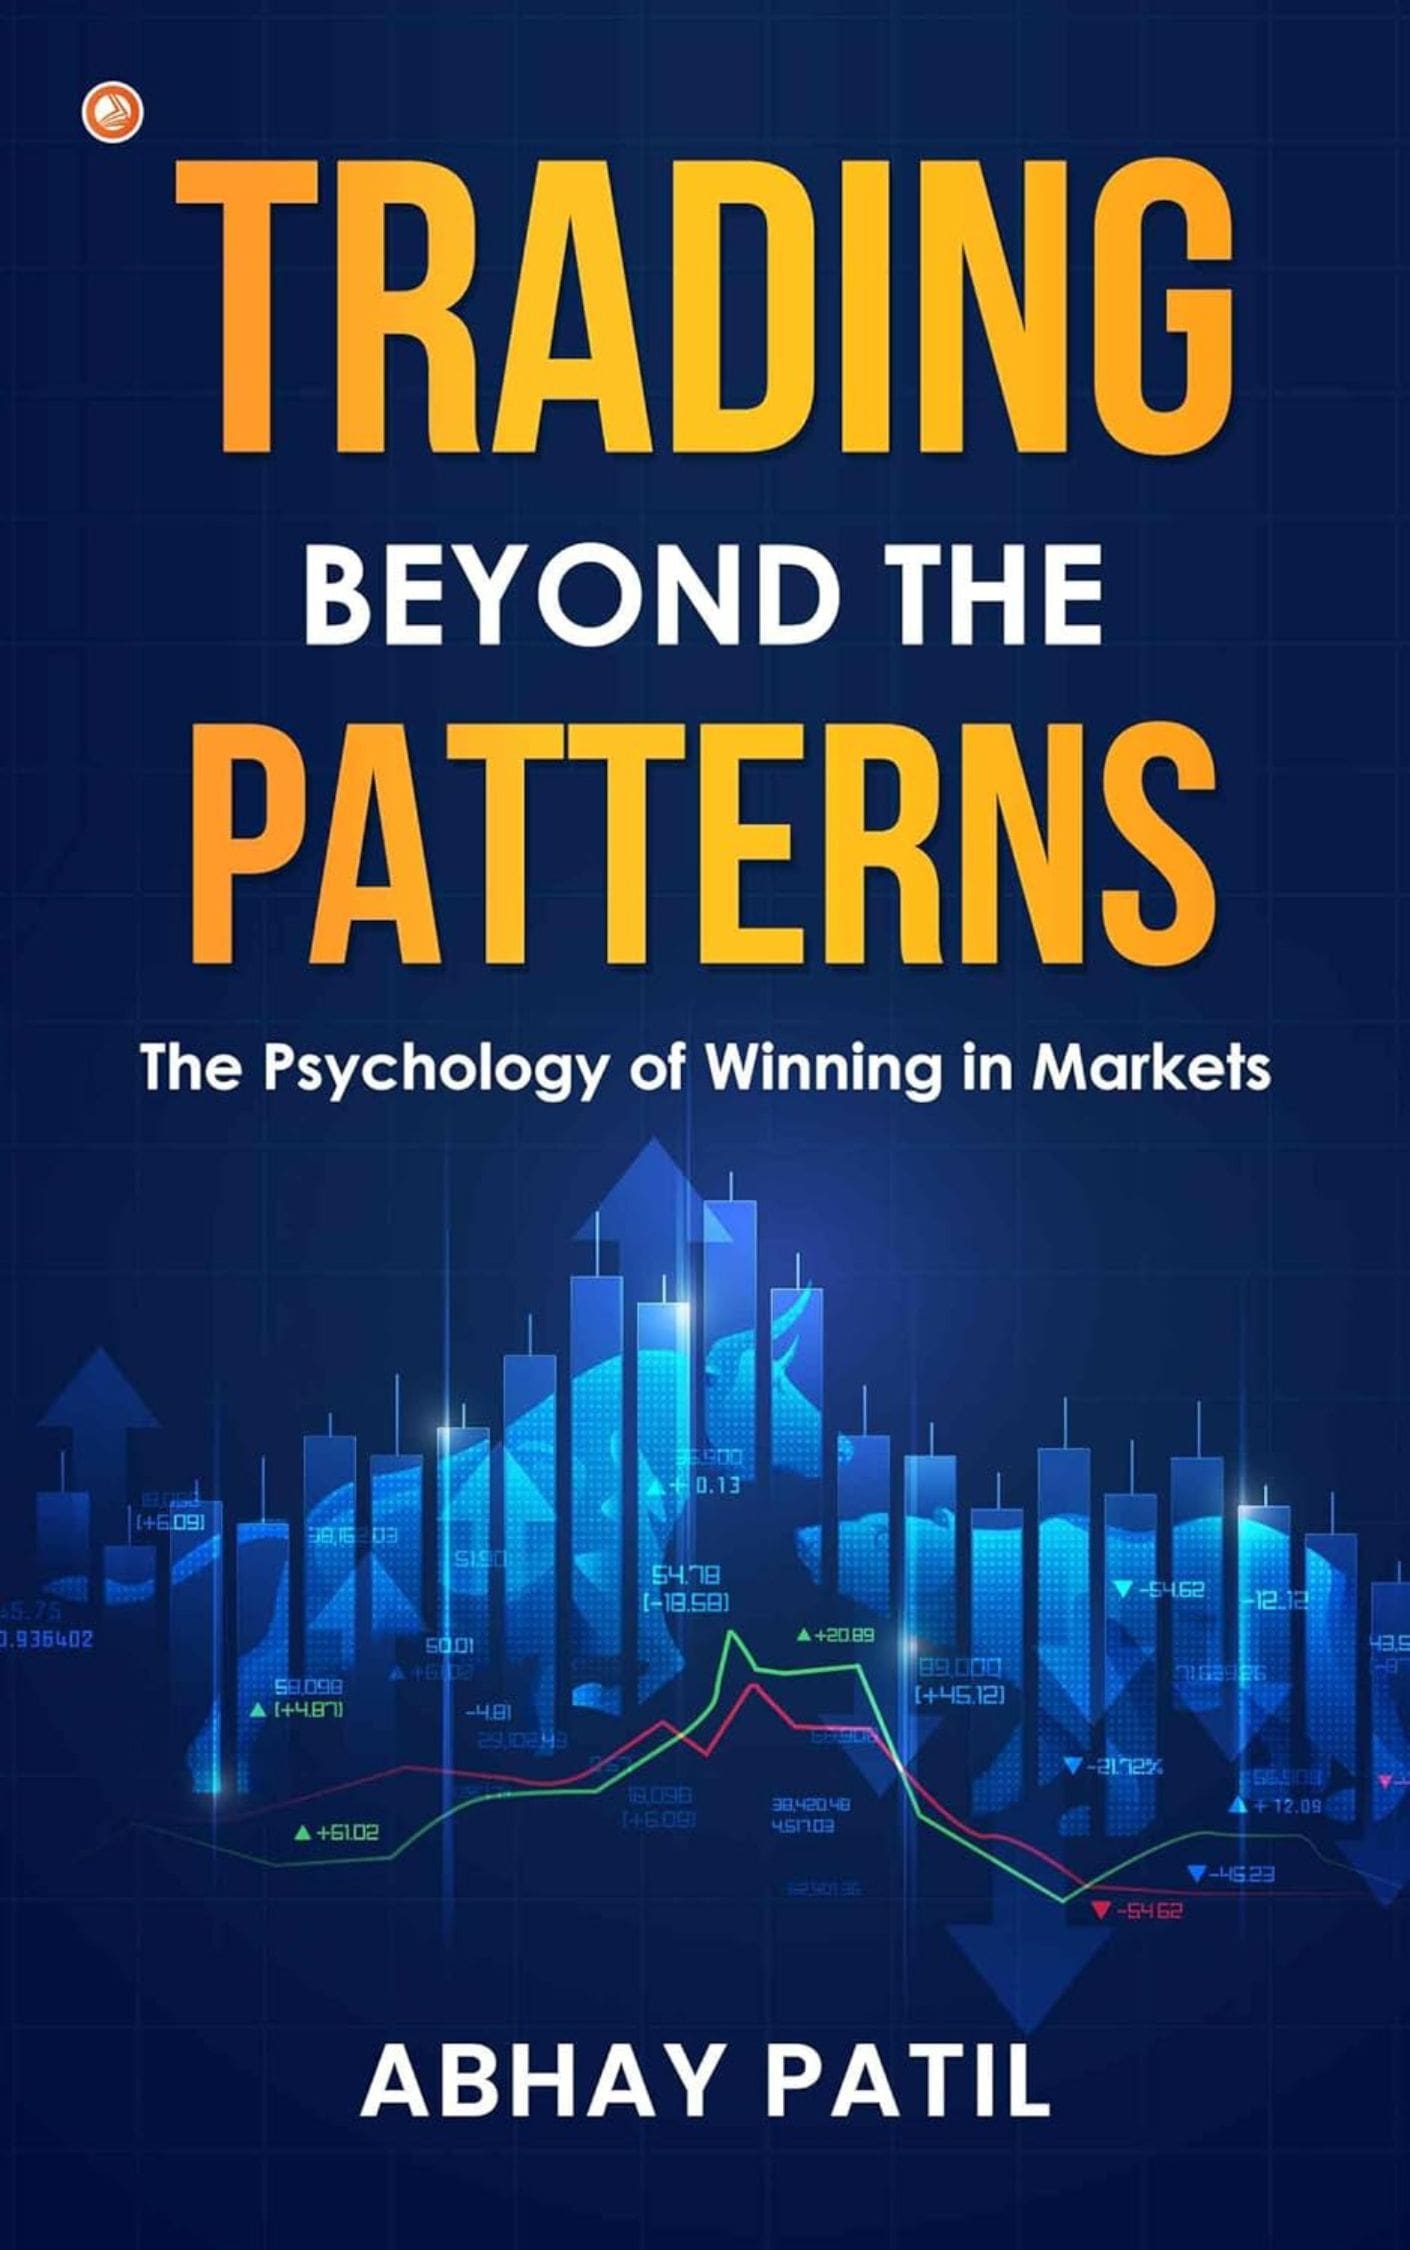 Trading Beyond the Patterns